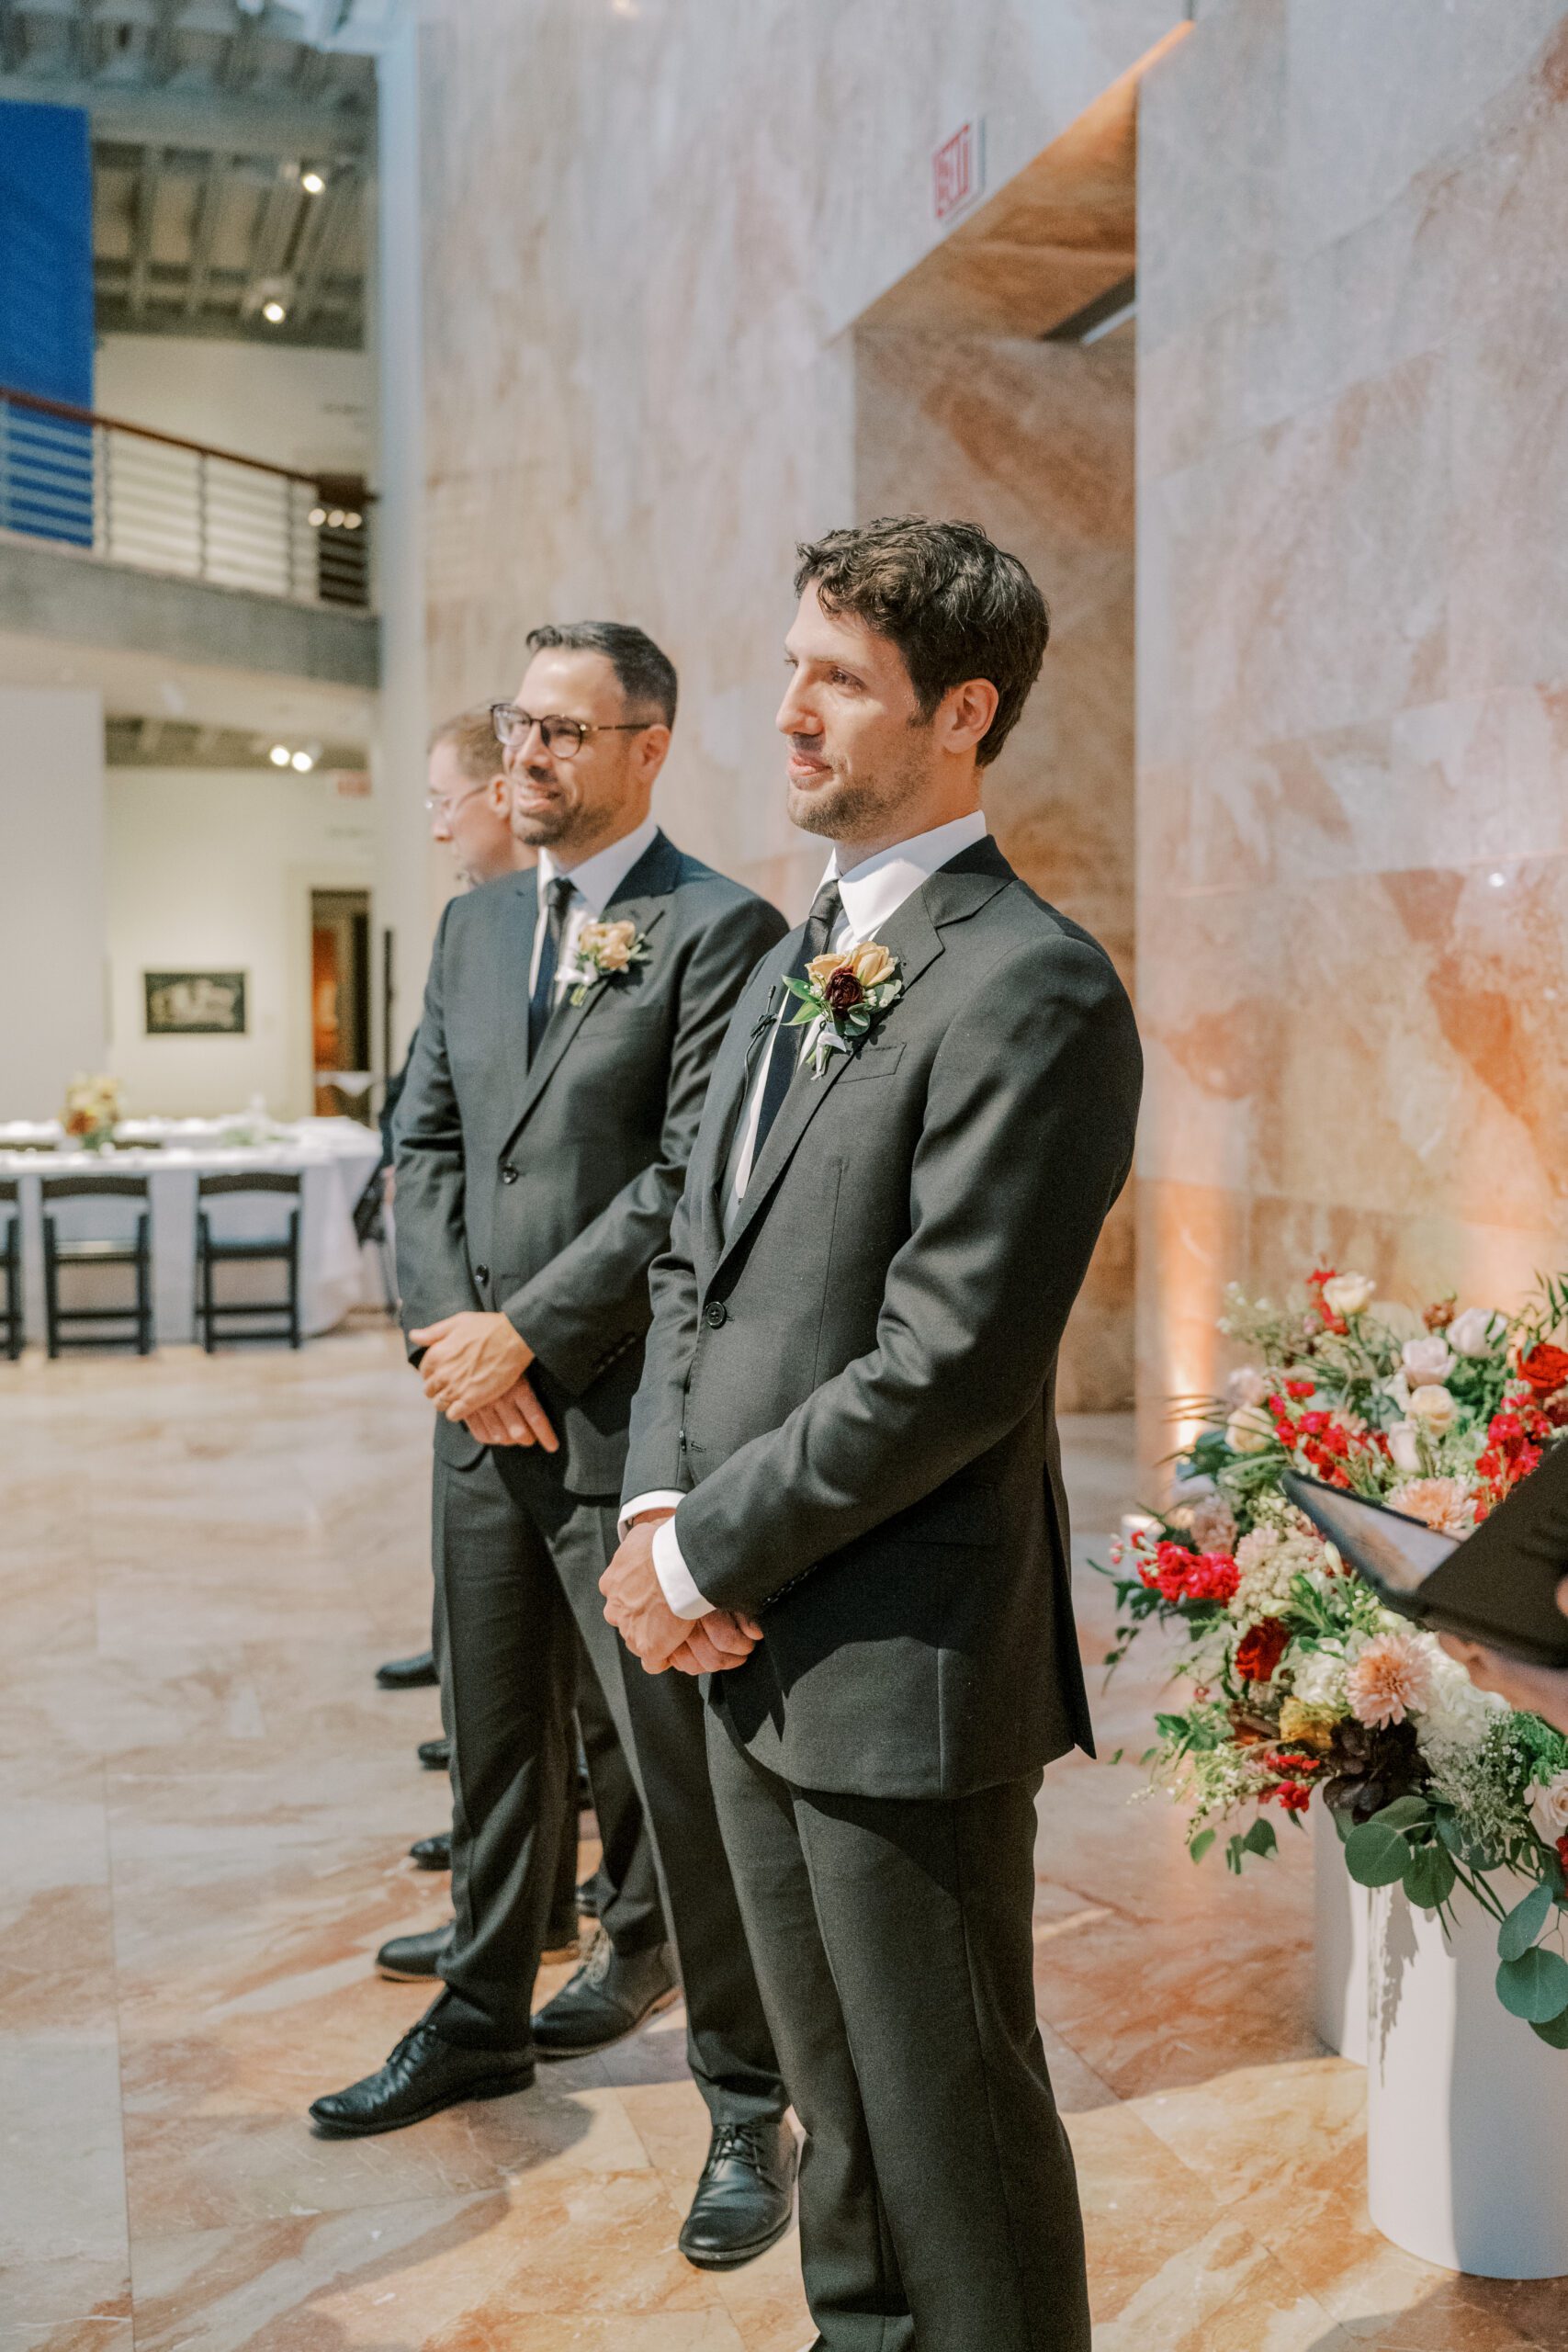 Groom standing at alter looking towards where bride would be, his groomsmen pictured in background, pink toned marble walls and floors inside vmfa